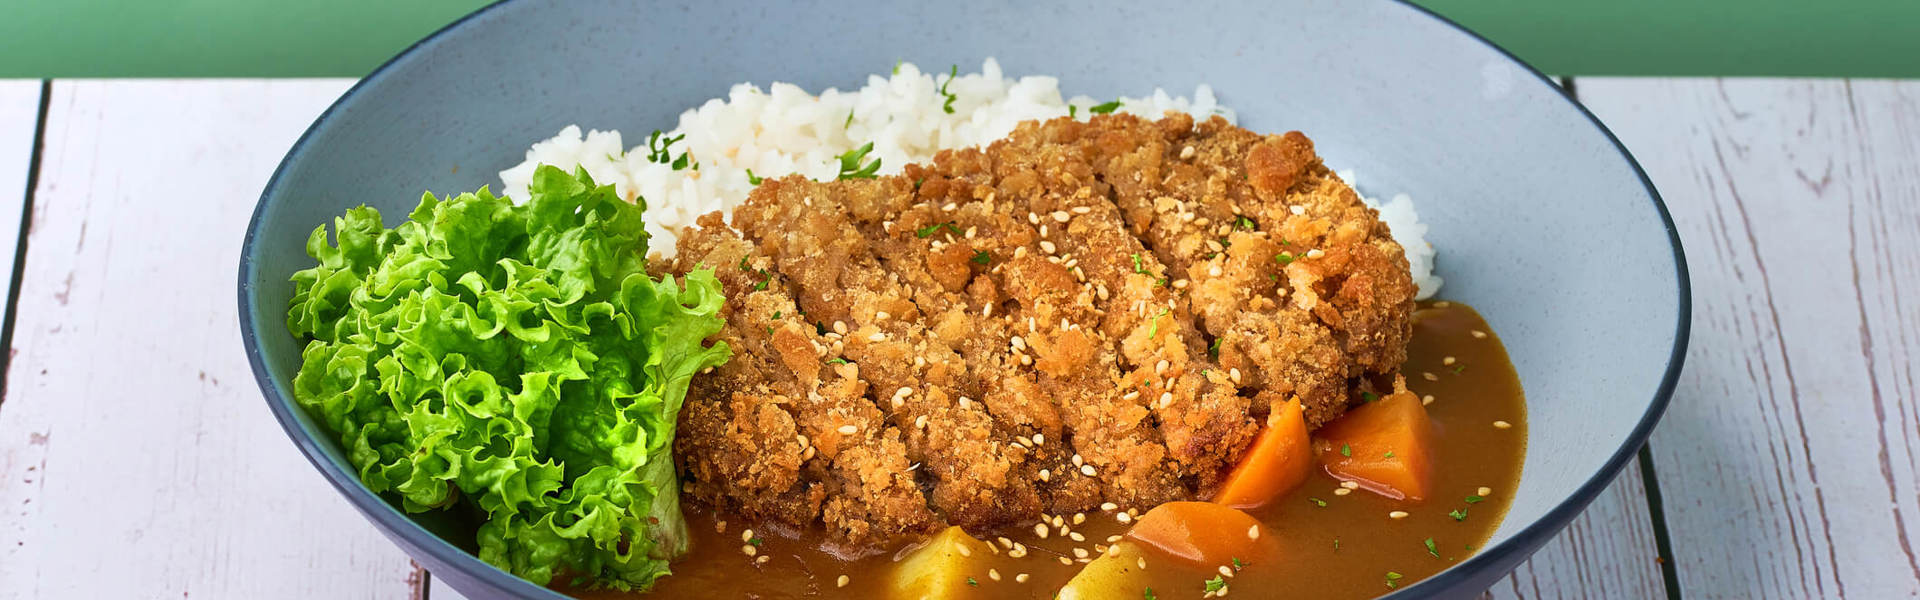 Chicken katsu curry with white rice and leafy greens in a blue bowl on a green background